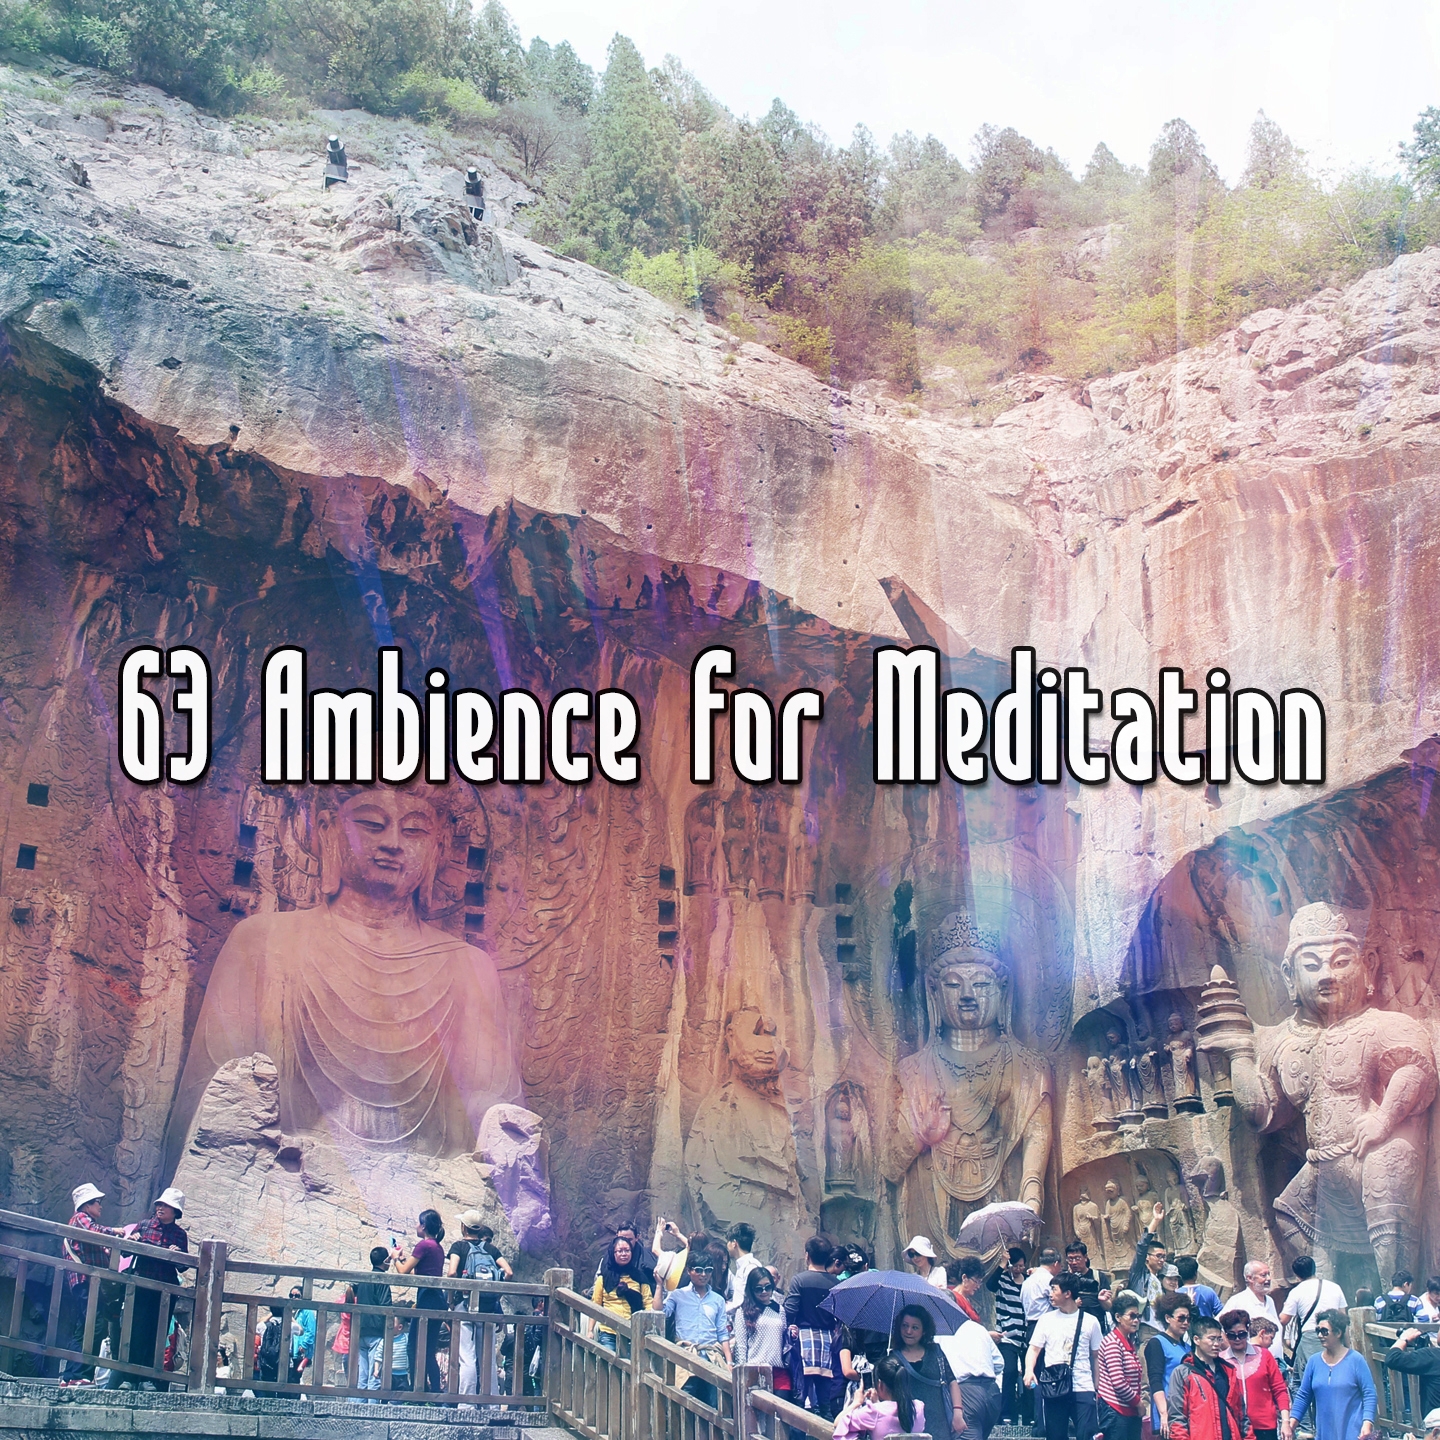 63 Ambience For Meditation